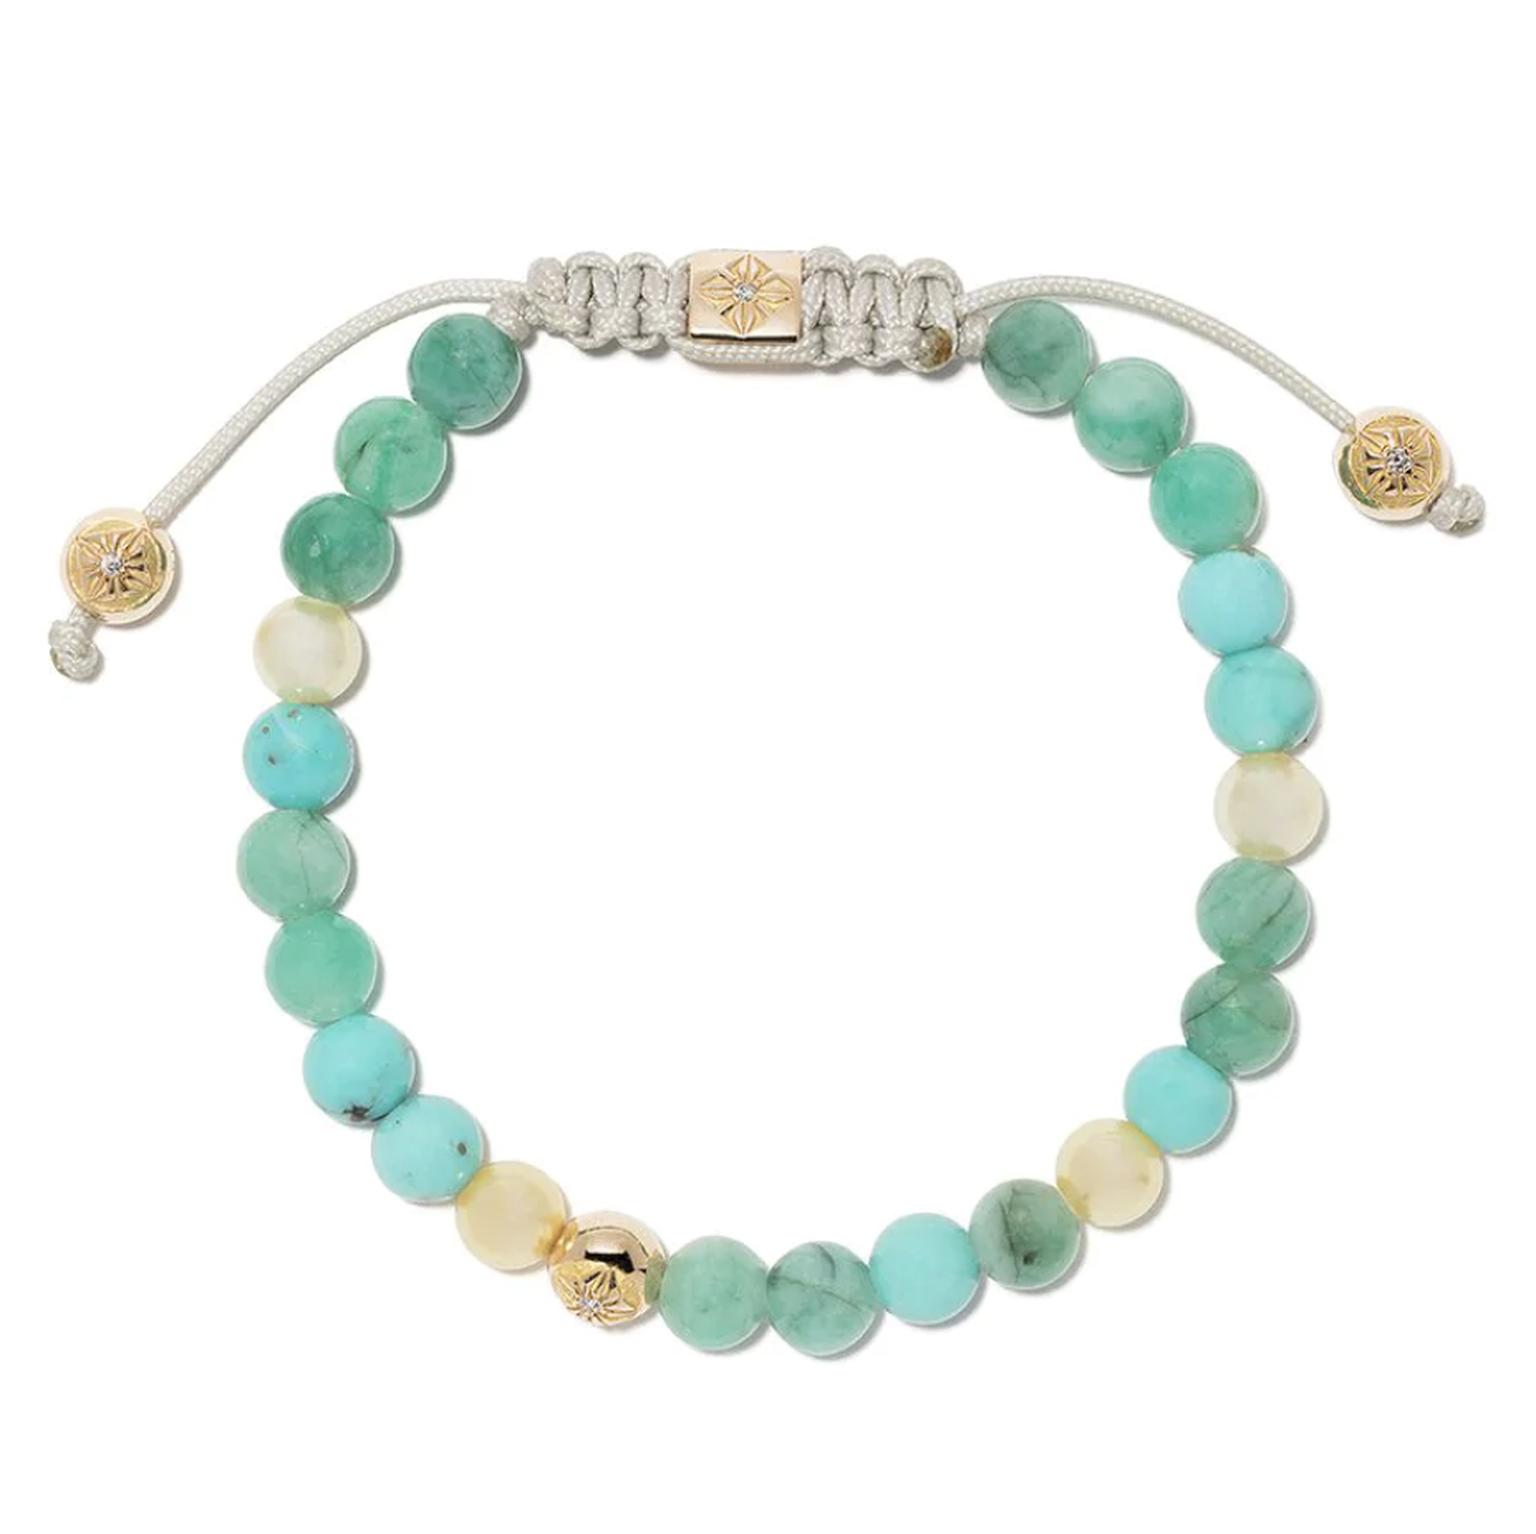 Turquoise and pearl bracelet by Shamballa